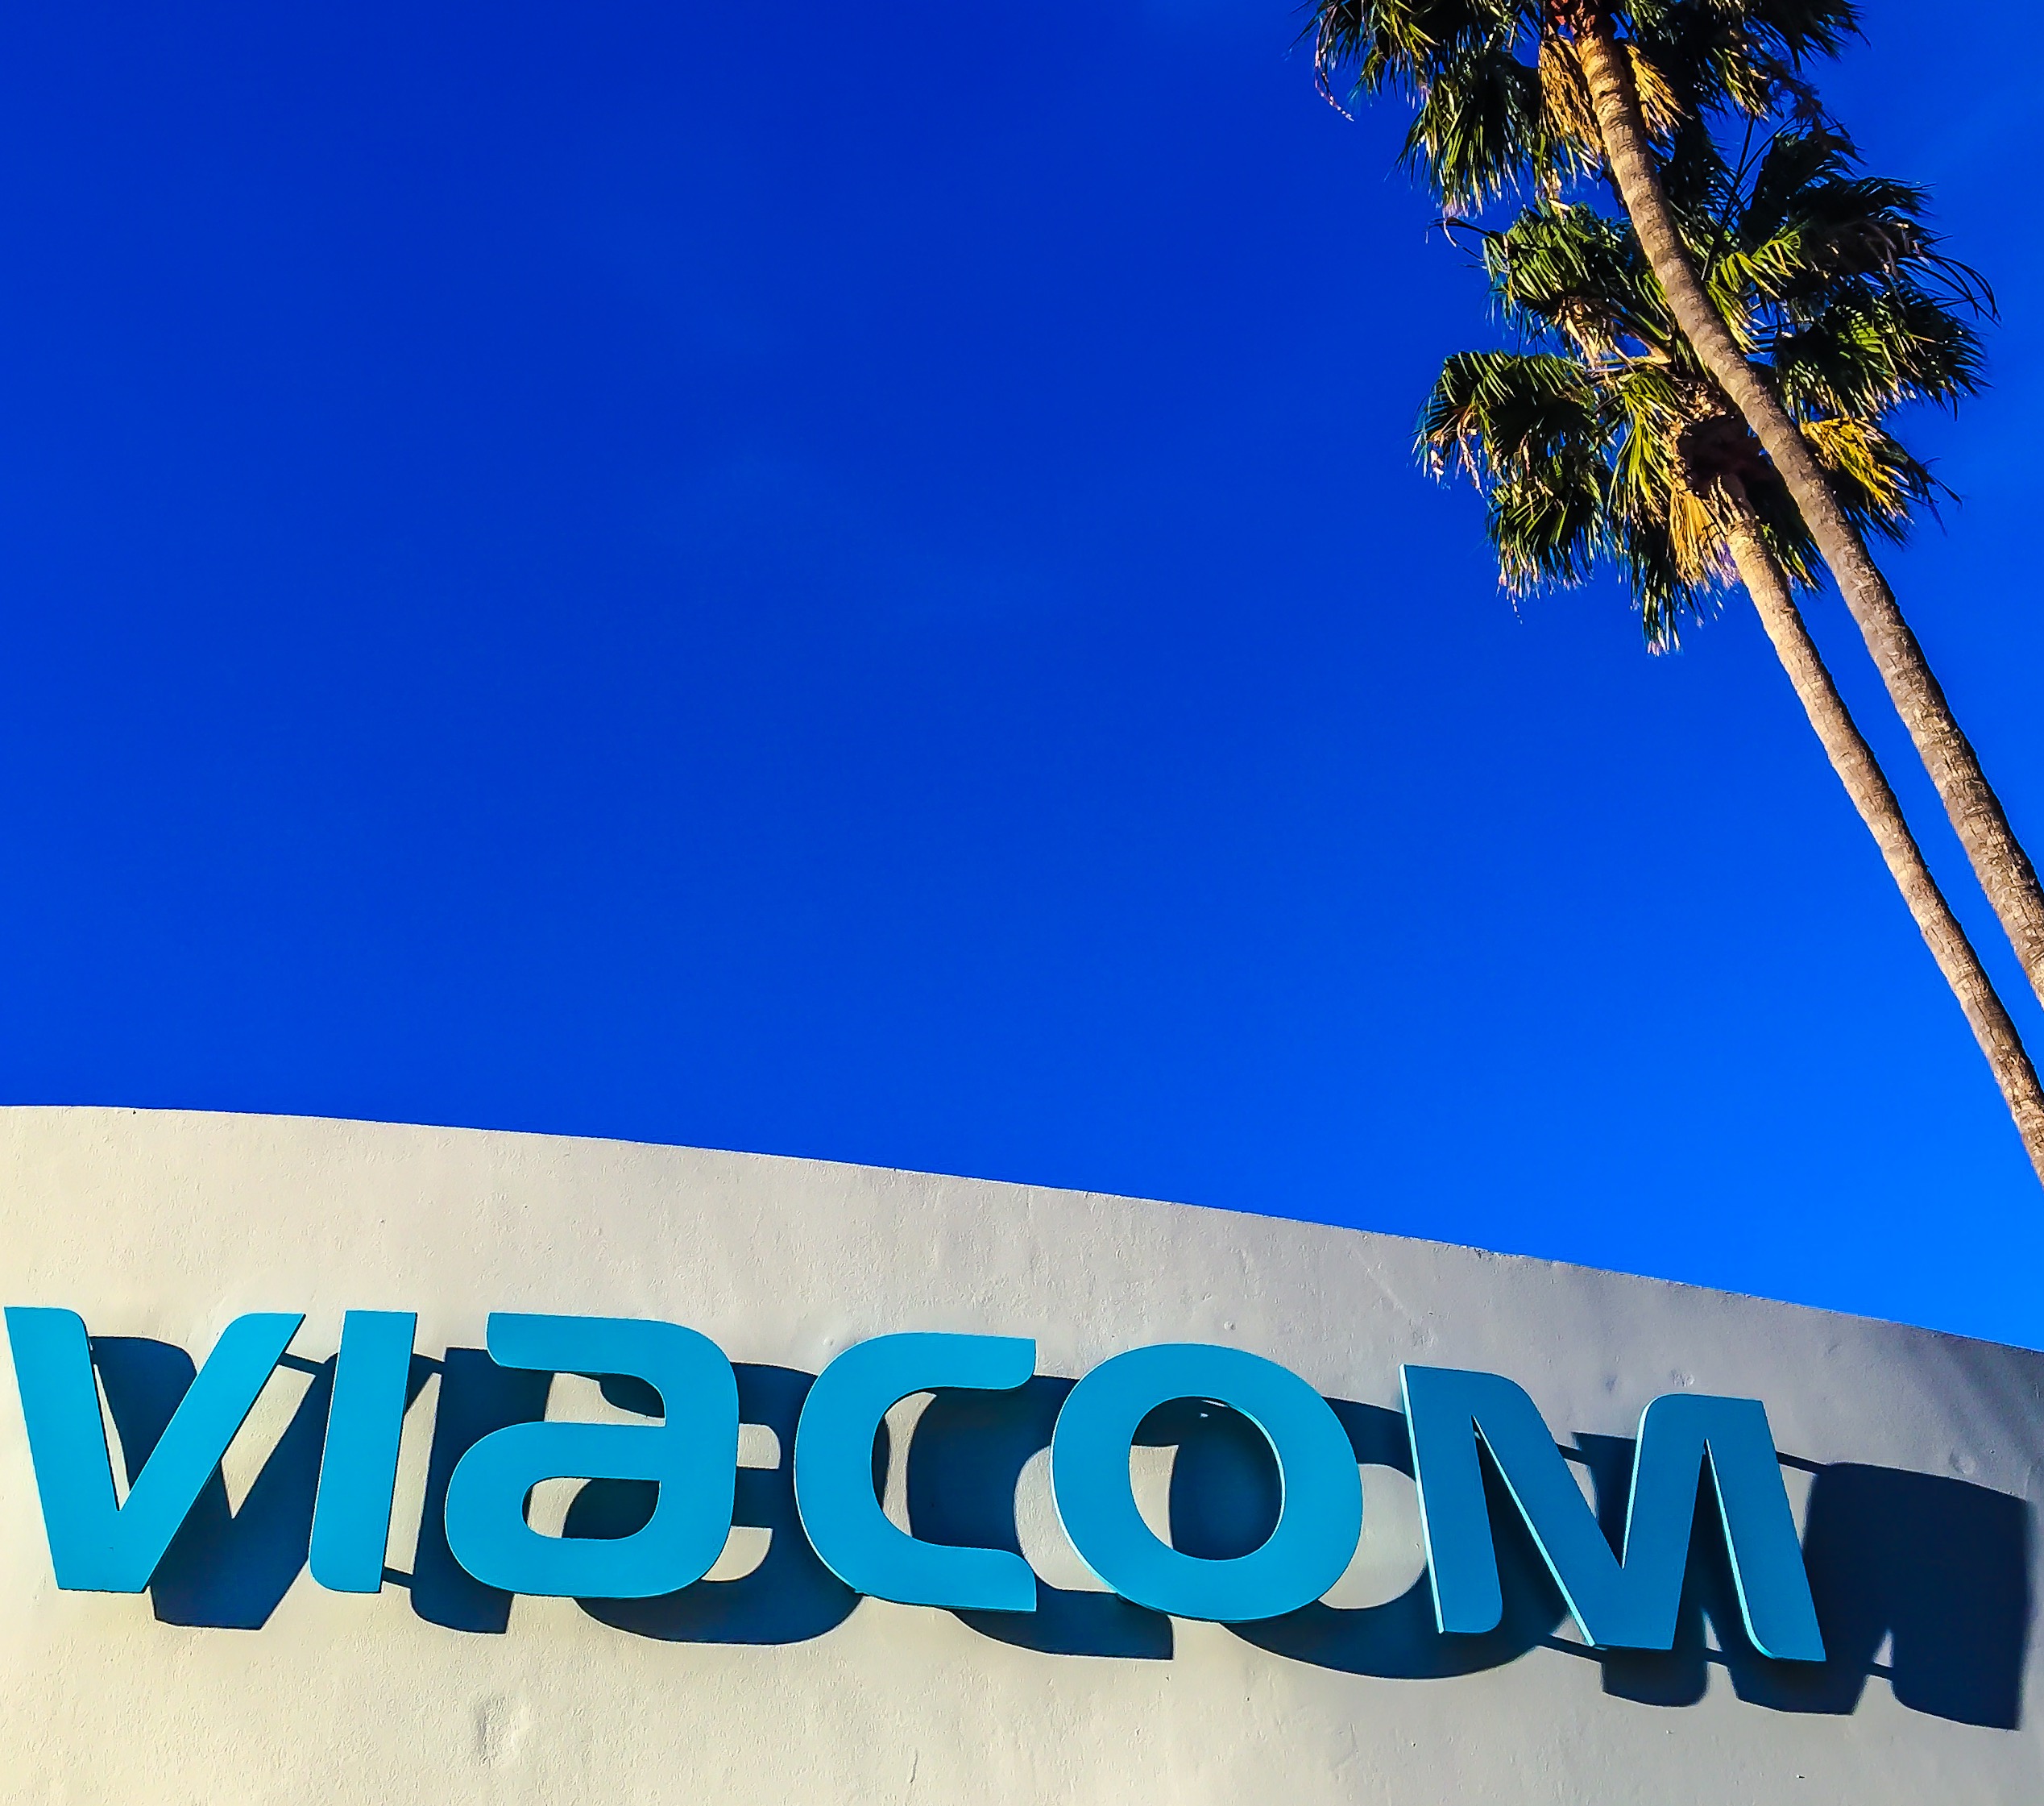 The Viacom corporate logo on the outside of a building leased by Viacom Santa Monica, Ca on Jann 27, 2015. (Bob Berg—Getty Images)